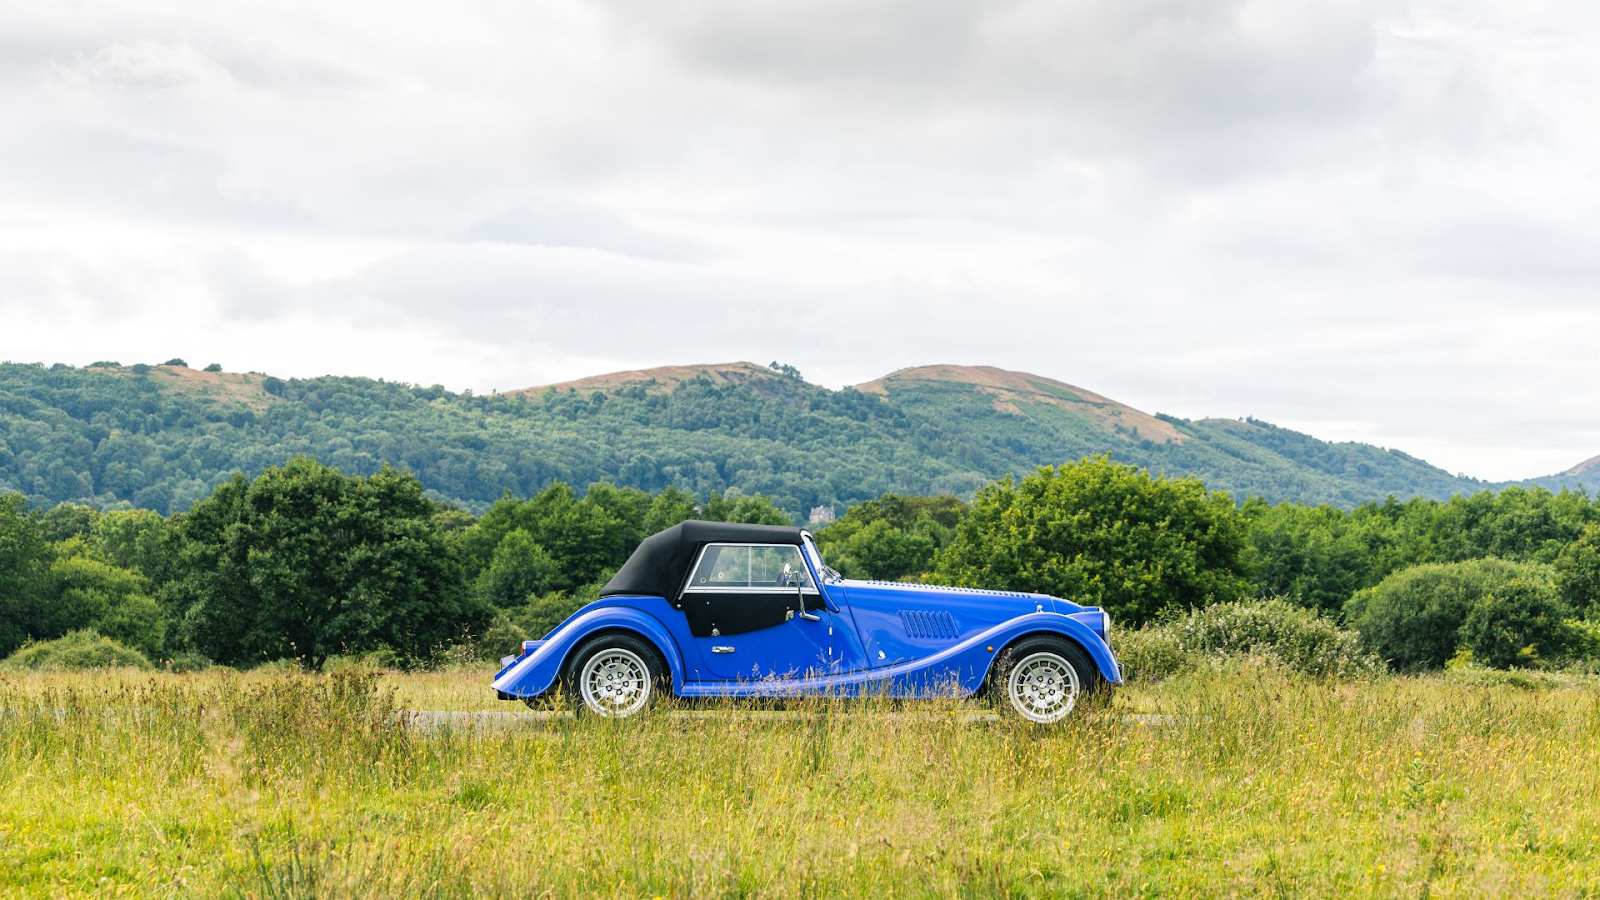 The inimitable style of the Morgan Plus Four